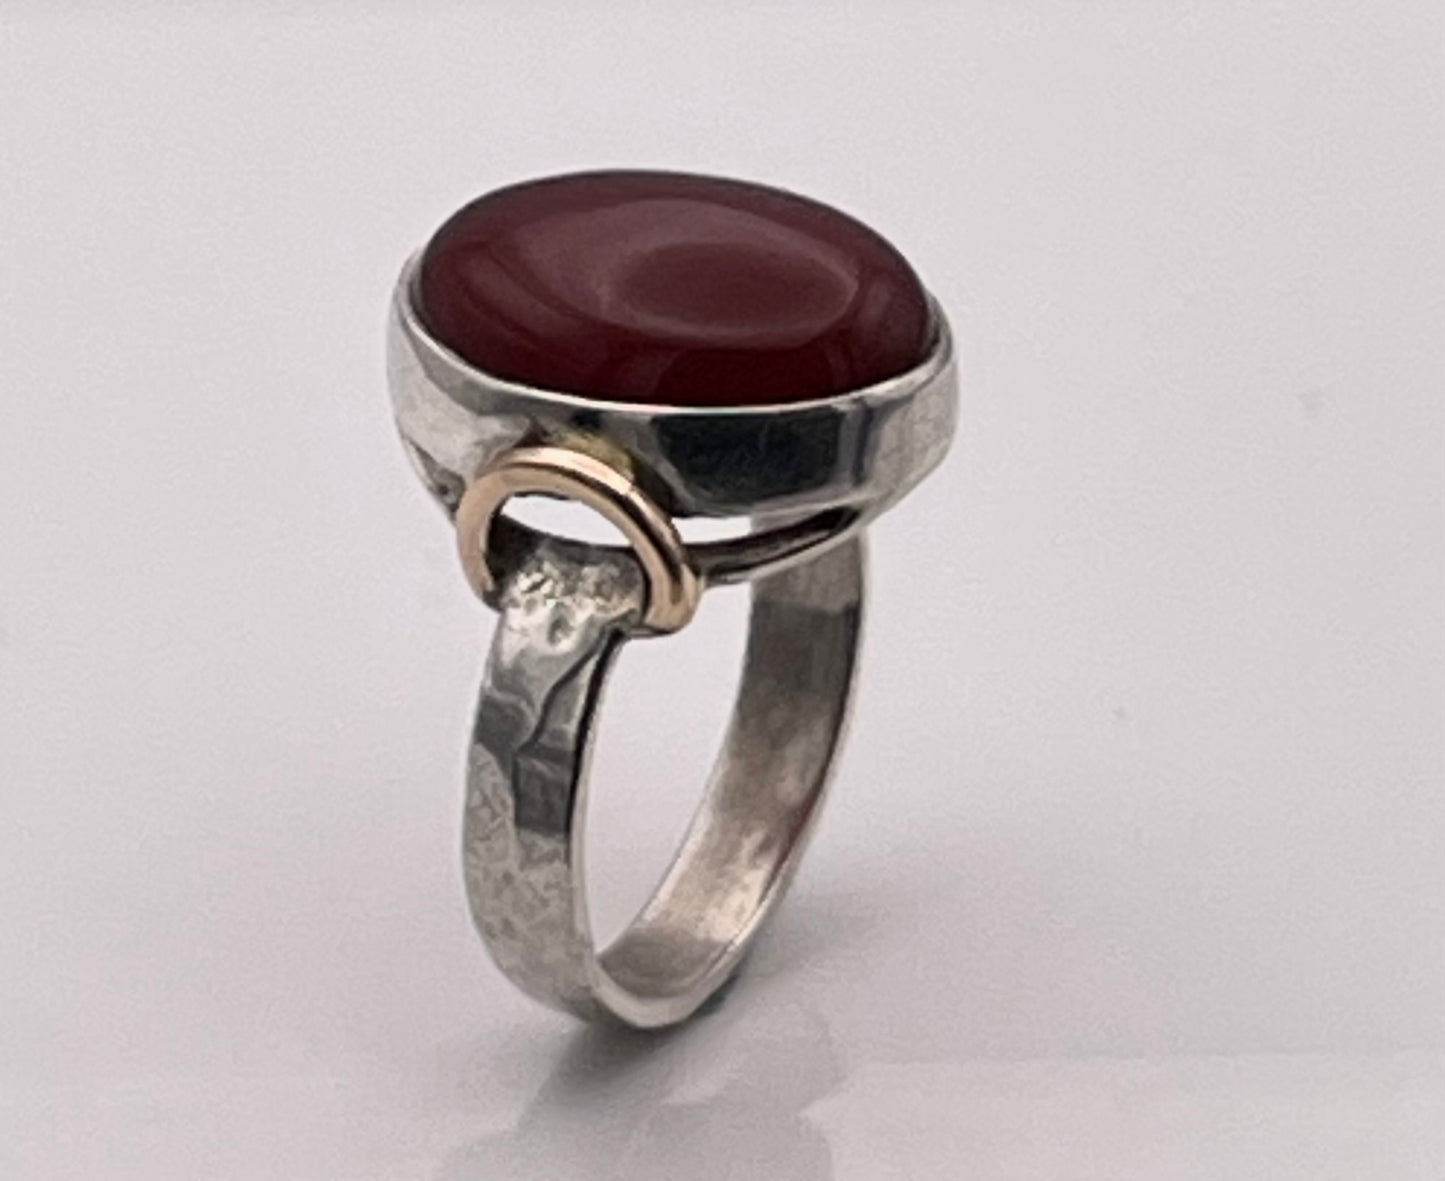 Handmade Carnelian, silver ring with gold finishes